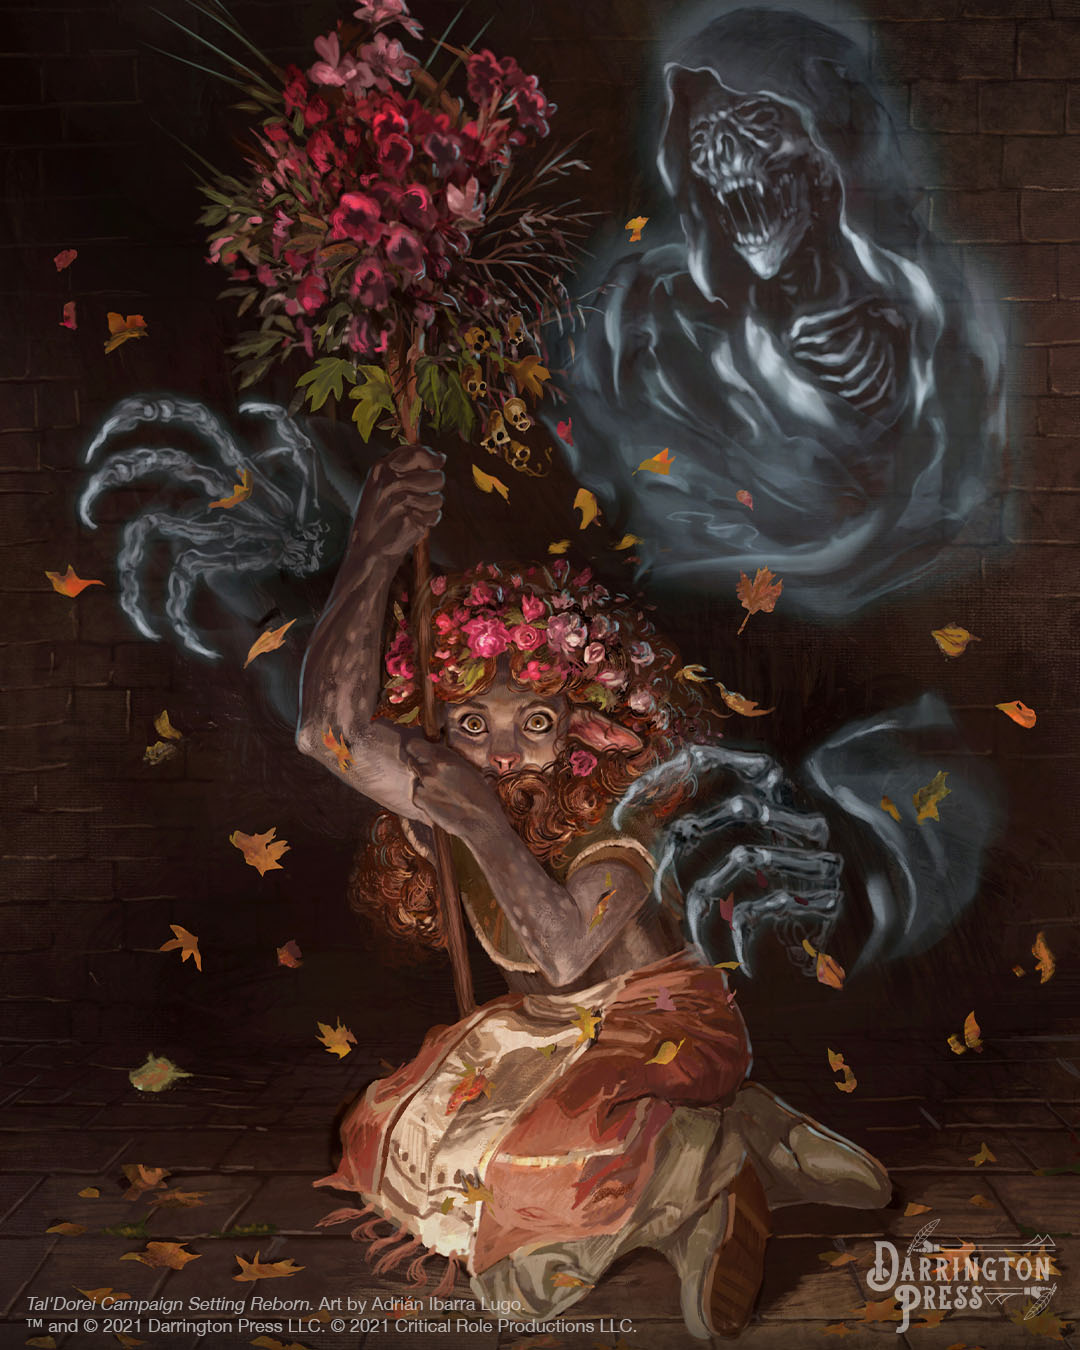 A brown firbolg with long curly brown-red hair adorned with pink and red flowers. She is wearing a pink and white skirt, sitting on a tiled floor holding a staff of pink and red flowers with leaves falling from it. Behind her is a wraith with their mouth open, and two large skeletal hands on either side of her. Art by Adrián Ibarra Lugo.